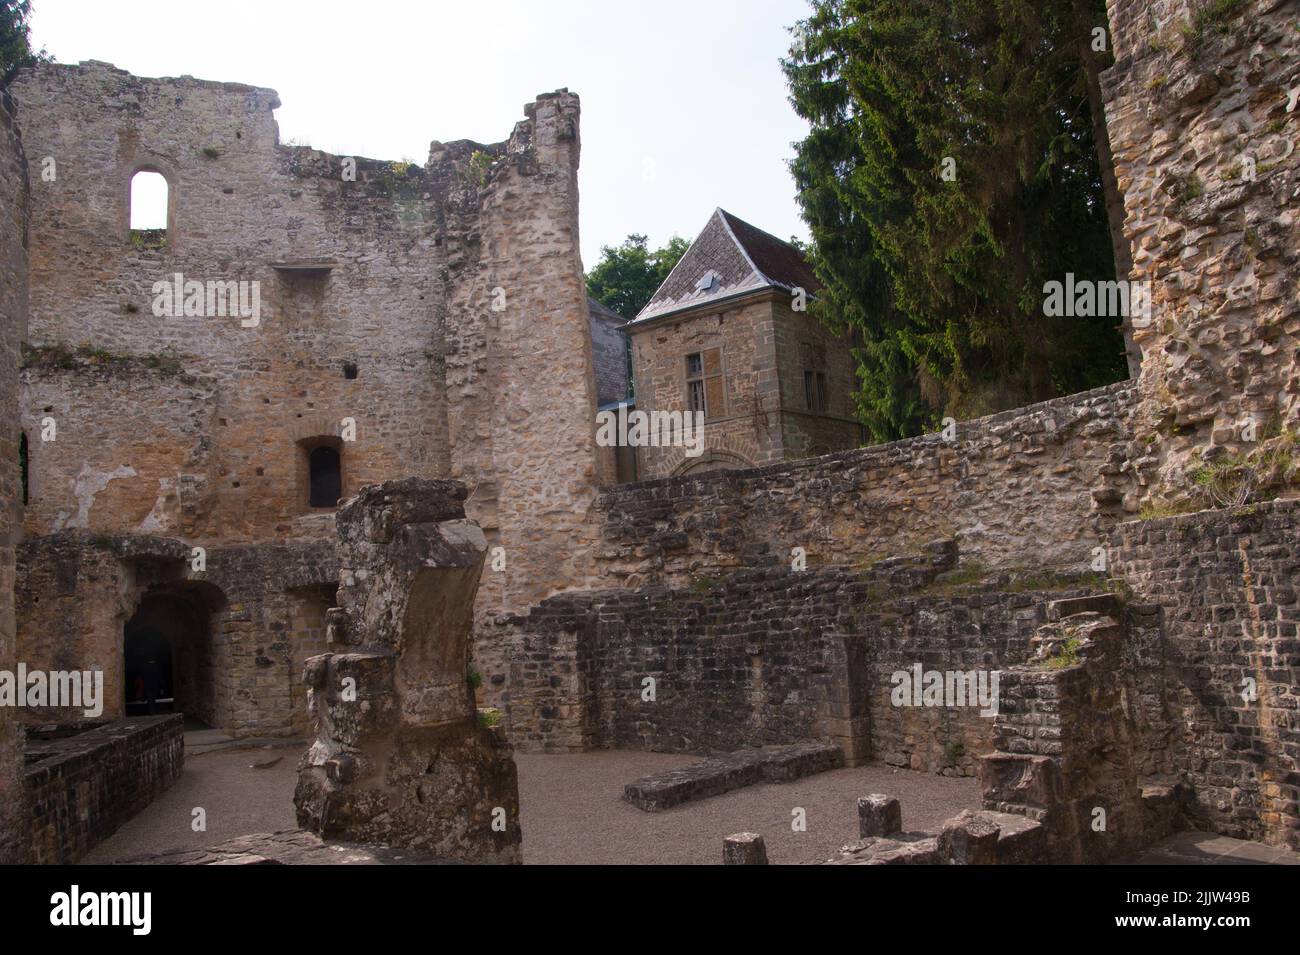 A view of the well-preserved medieval Castle Beaufort in Luxembourg Stock Photo